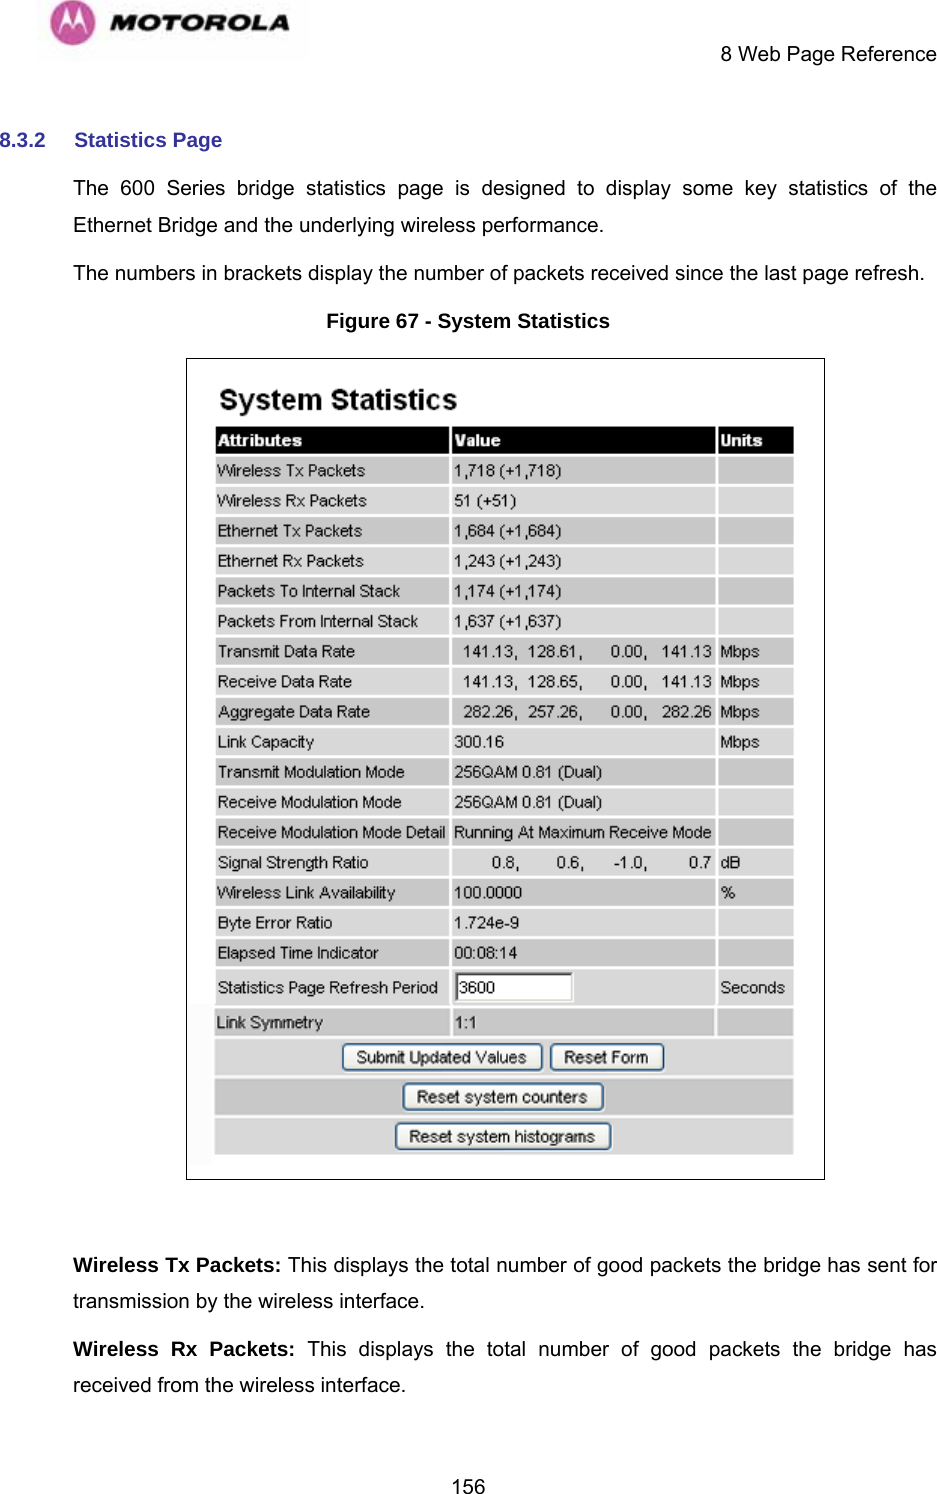     8 Web Page Reference  1568.3.2  Statistics Page  The 600 Series bridge statistics page is designed to display some key statistics of the Ethernet Bridge and the underlying wireless performance.  The numbers in brackets display the number of packets received since the last page refresh. Figure 67 - System Statistics   Wireless Tx Packets: This displays the total number of good packets the bridge has sent for transmission by the wireless interface. Wireless Rx Packets: This displays the total number of good packets the bridge has received from the wireless interface. 